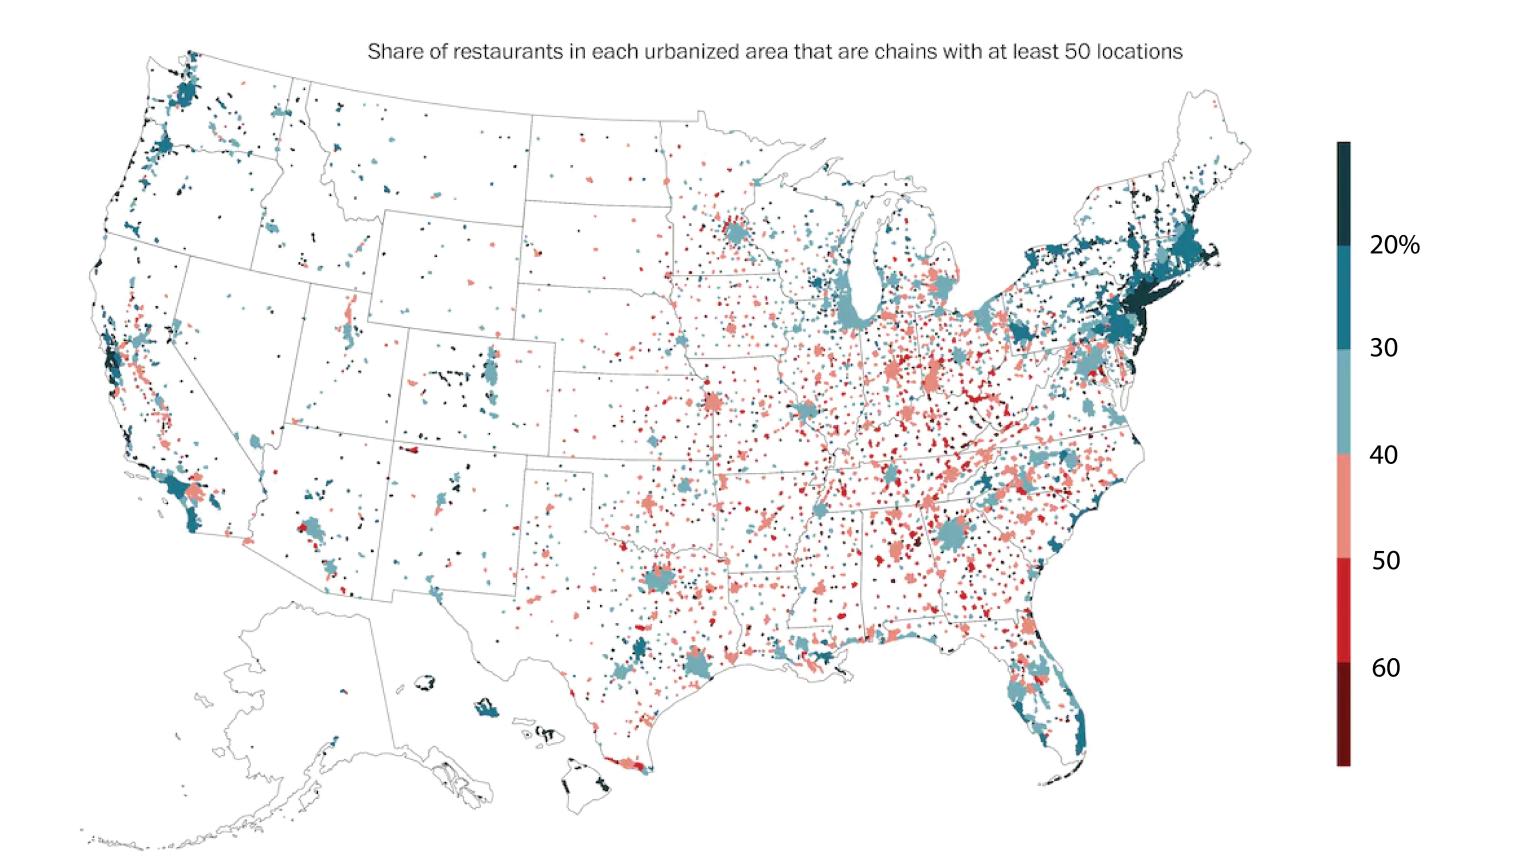 Map of share of restaurants in each urbanized area around the United States that are chains with at least 50 locations